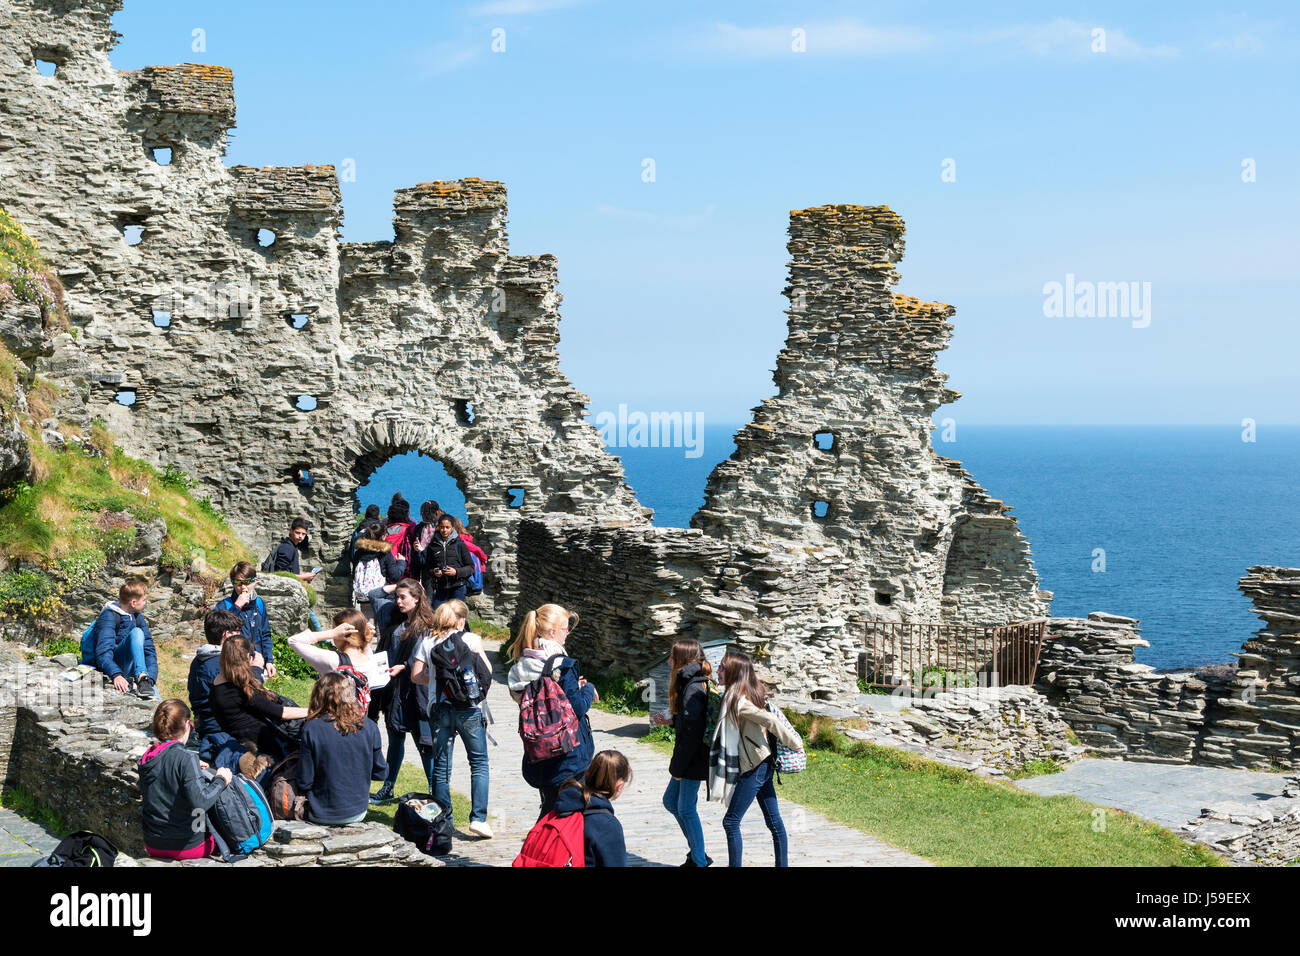 schoolchildren on an education visit to tintagel castle in cornwall, england, britain, uk. Stock Photo